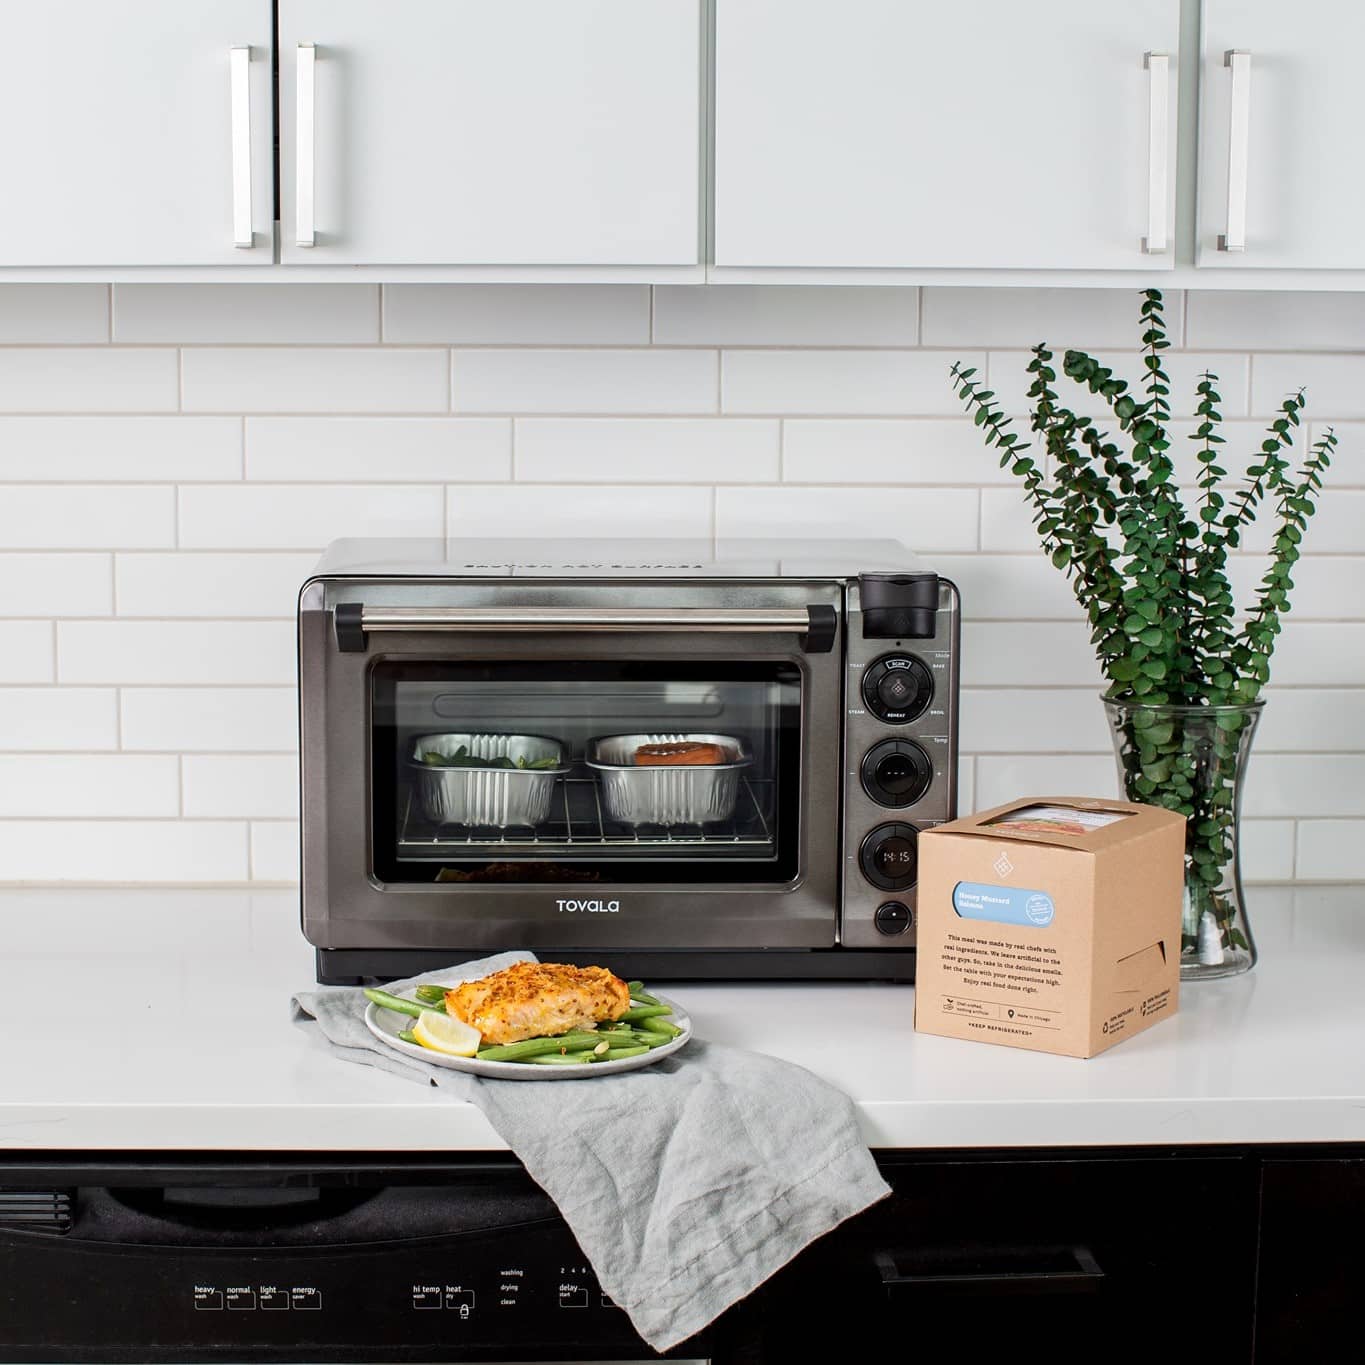 Tovala Smart Oven Review - Must Read This Before Buying